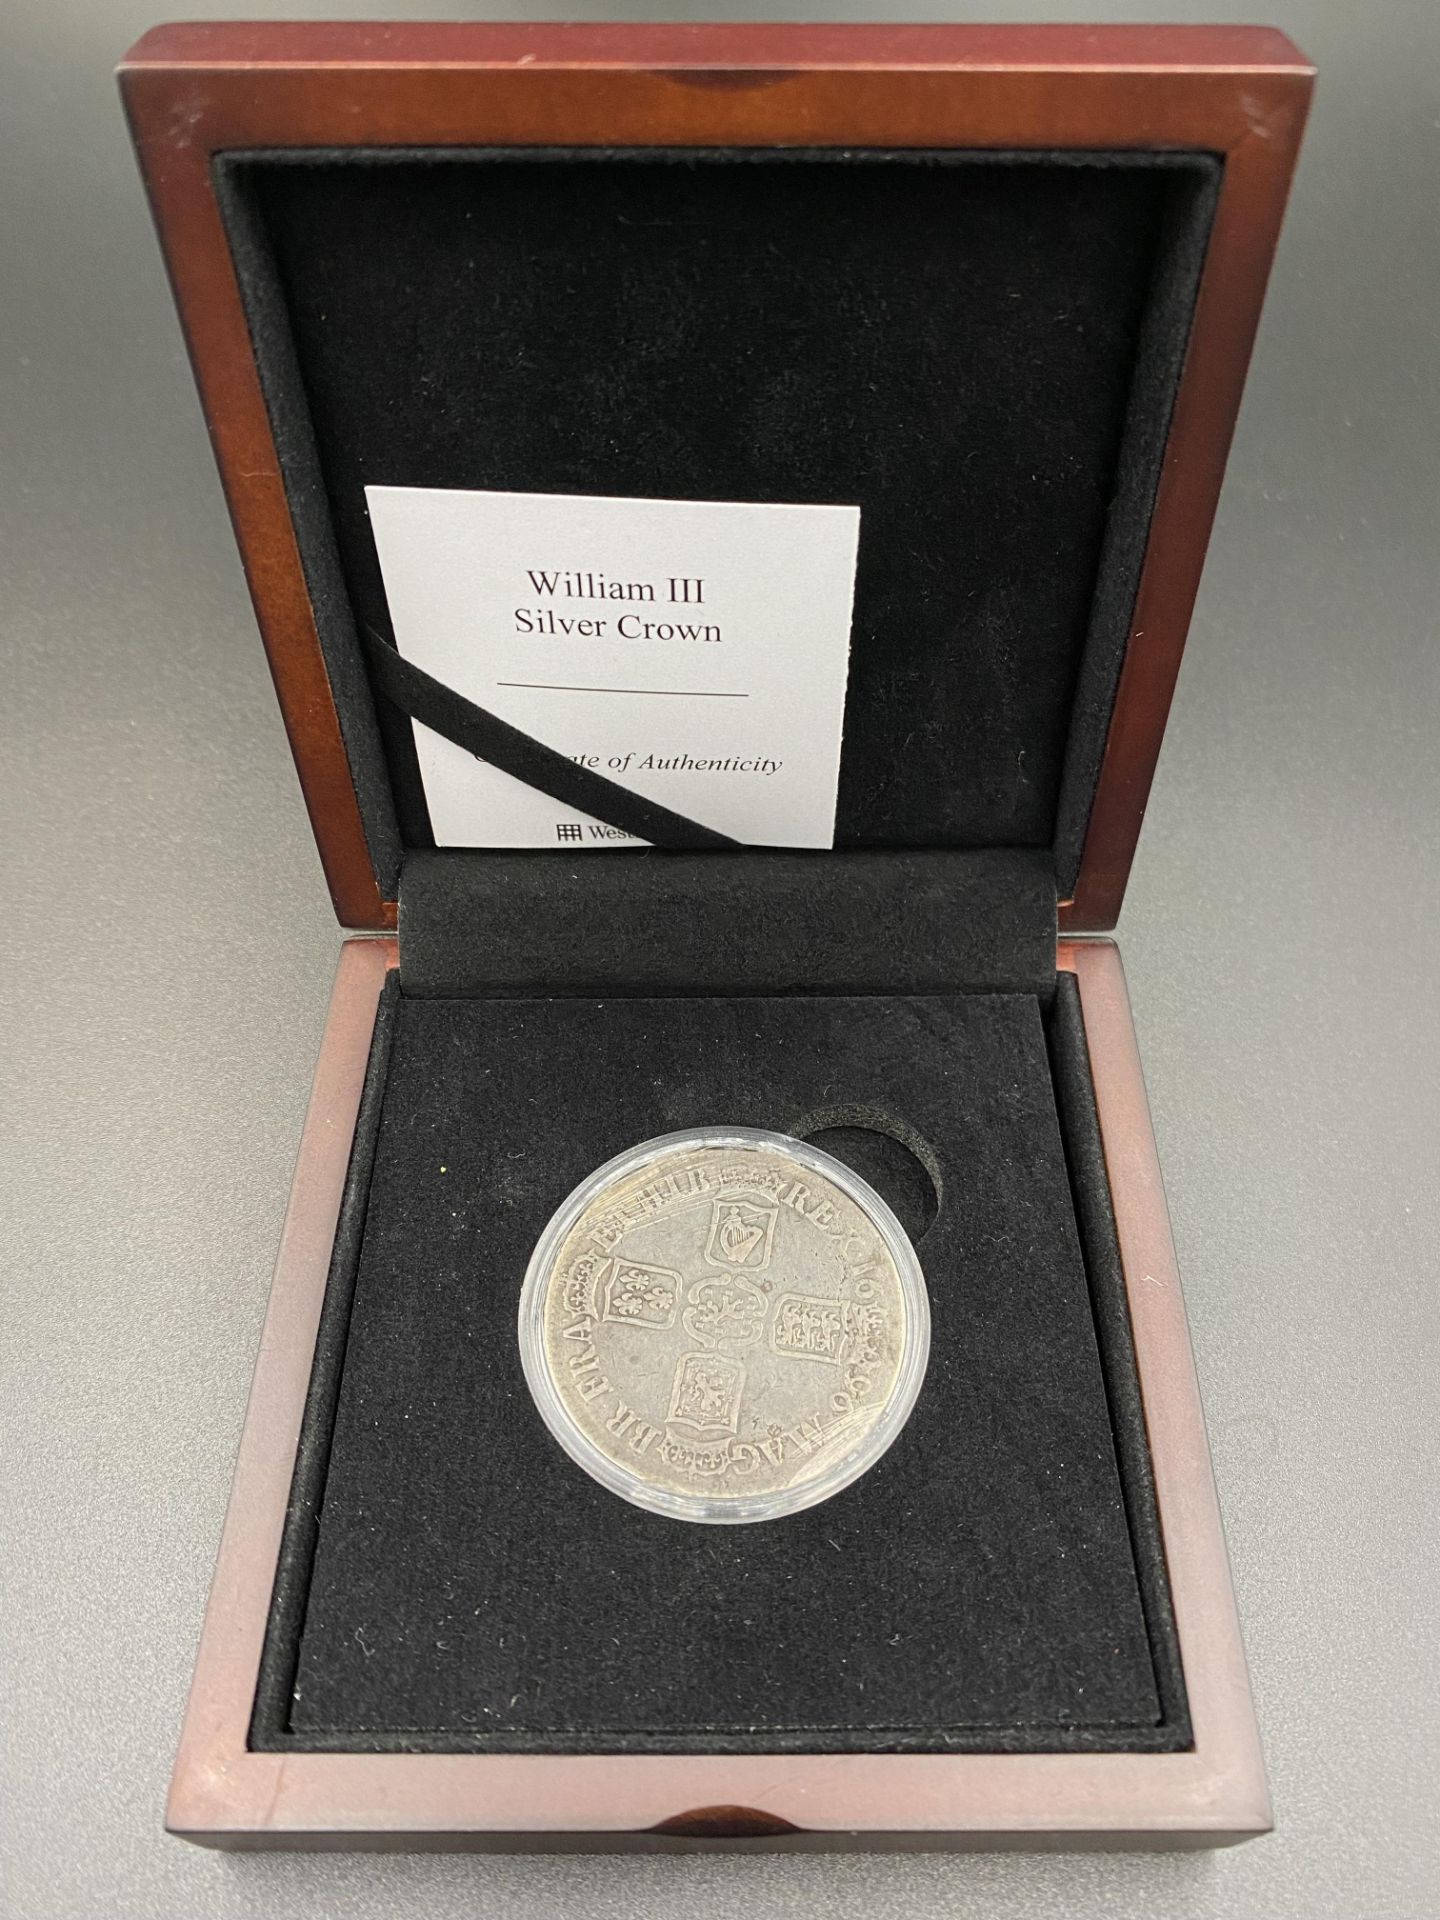 William III silver crown, 1696, boxed with Westminster certificate of authenticity